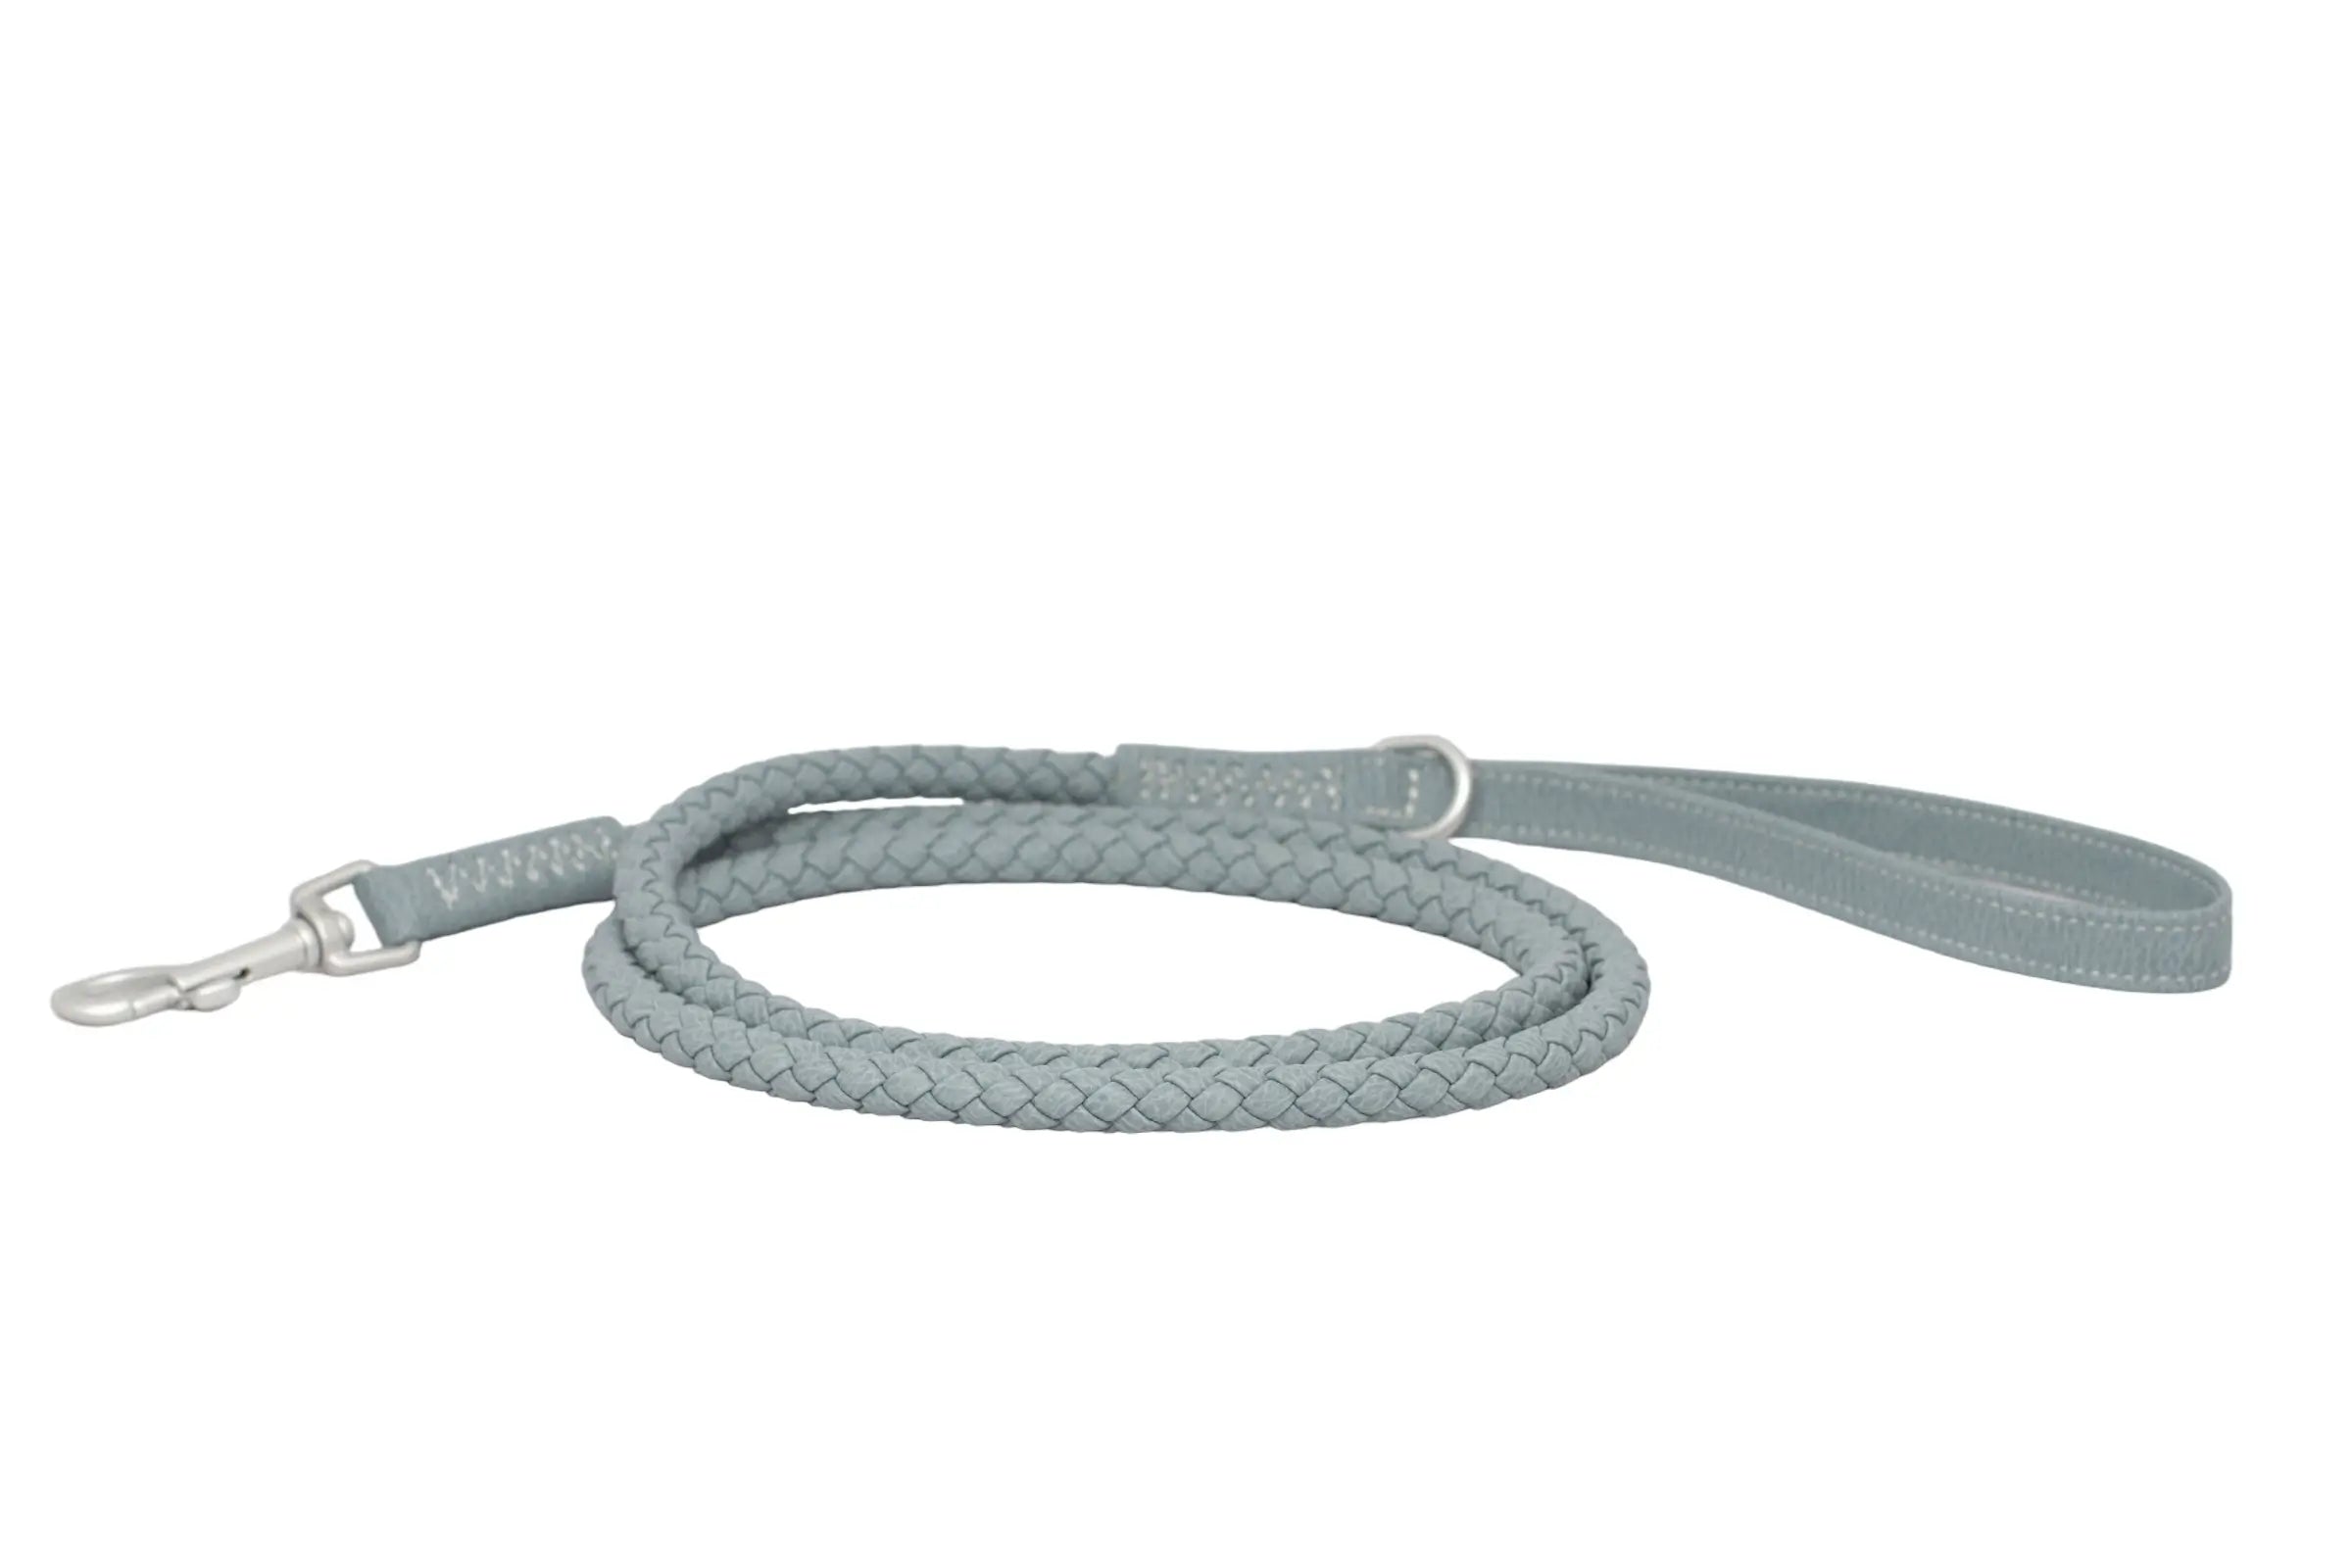 Front of a waterproof and durable dog leash with marine grade anodized aluminum hardware in the color London blue.